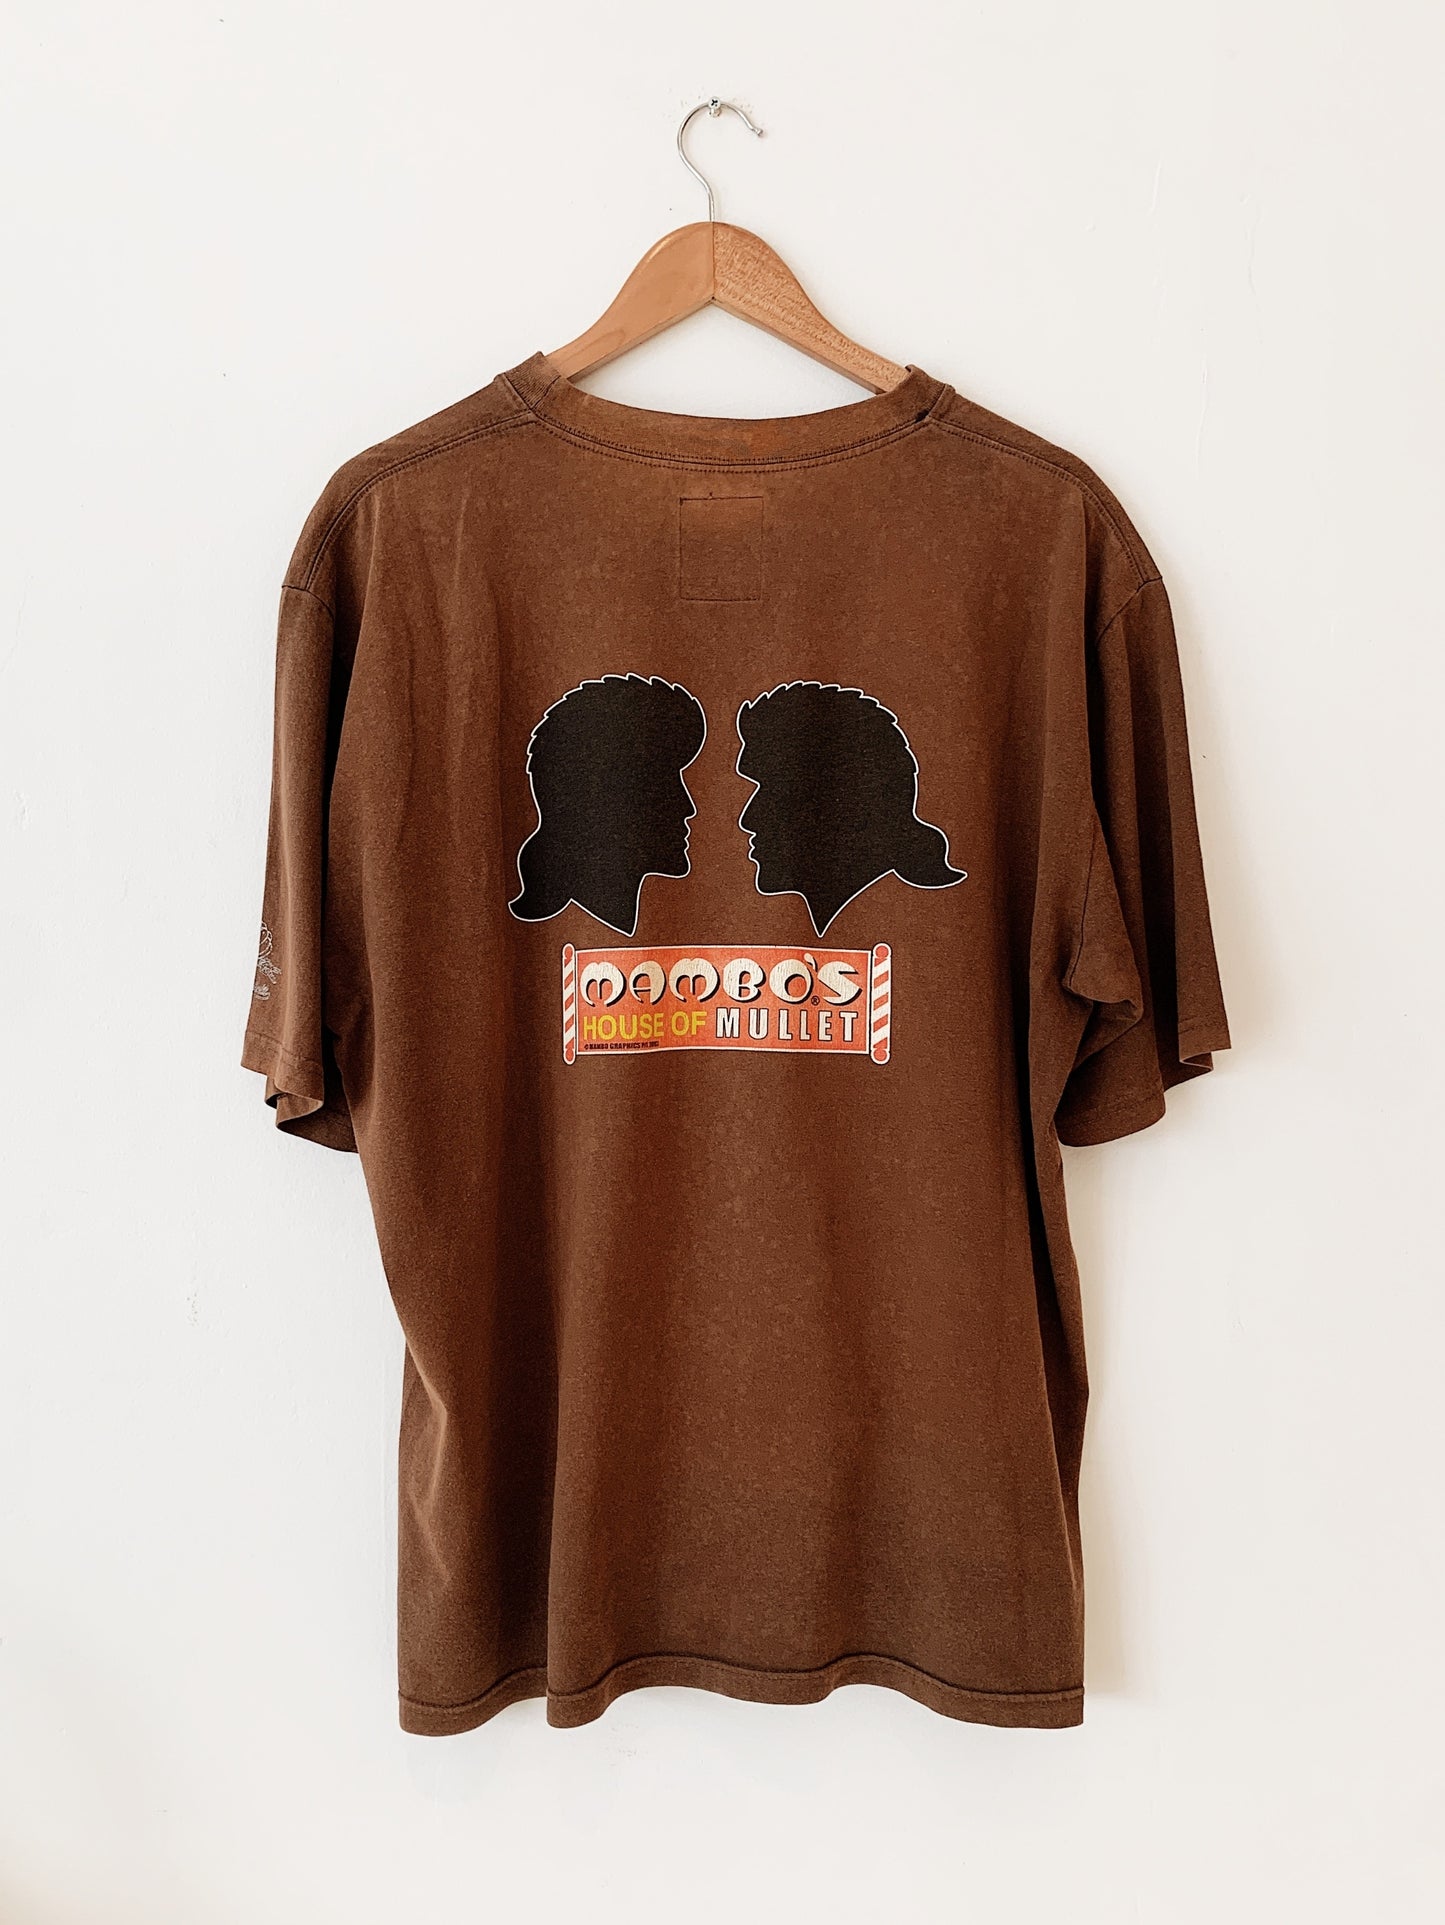 Vintage Jim Mitchell for Mambo "House of Mullet" '03 T-Shirt